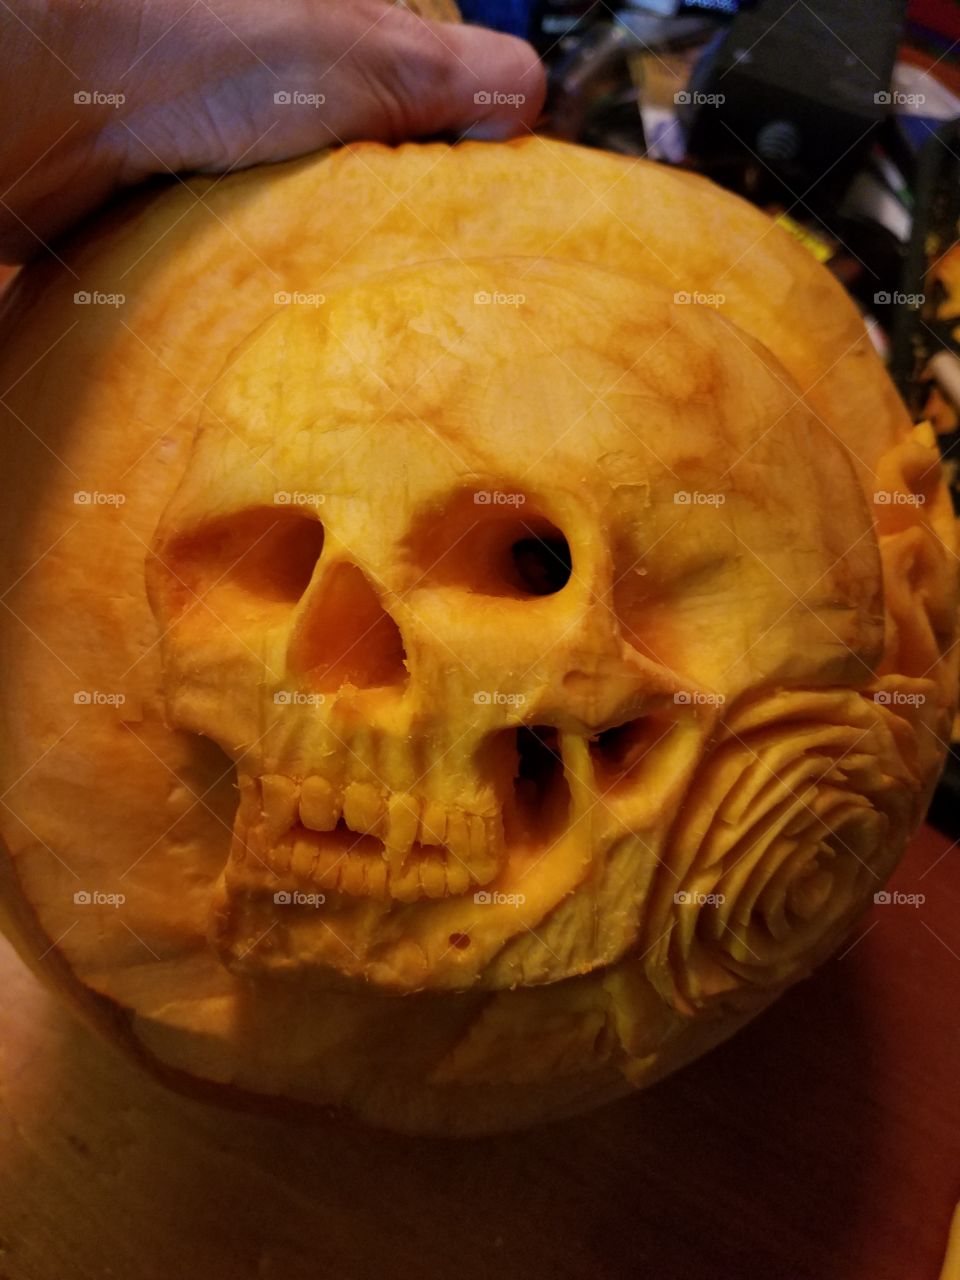 Picture of the skull pumpkin carving looking straight at the face of the pumpkin. Was creating depth so when the candlelight illuminated from within, there would be awesome results.